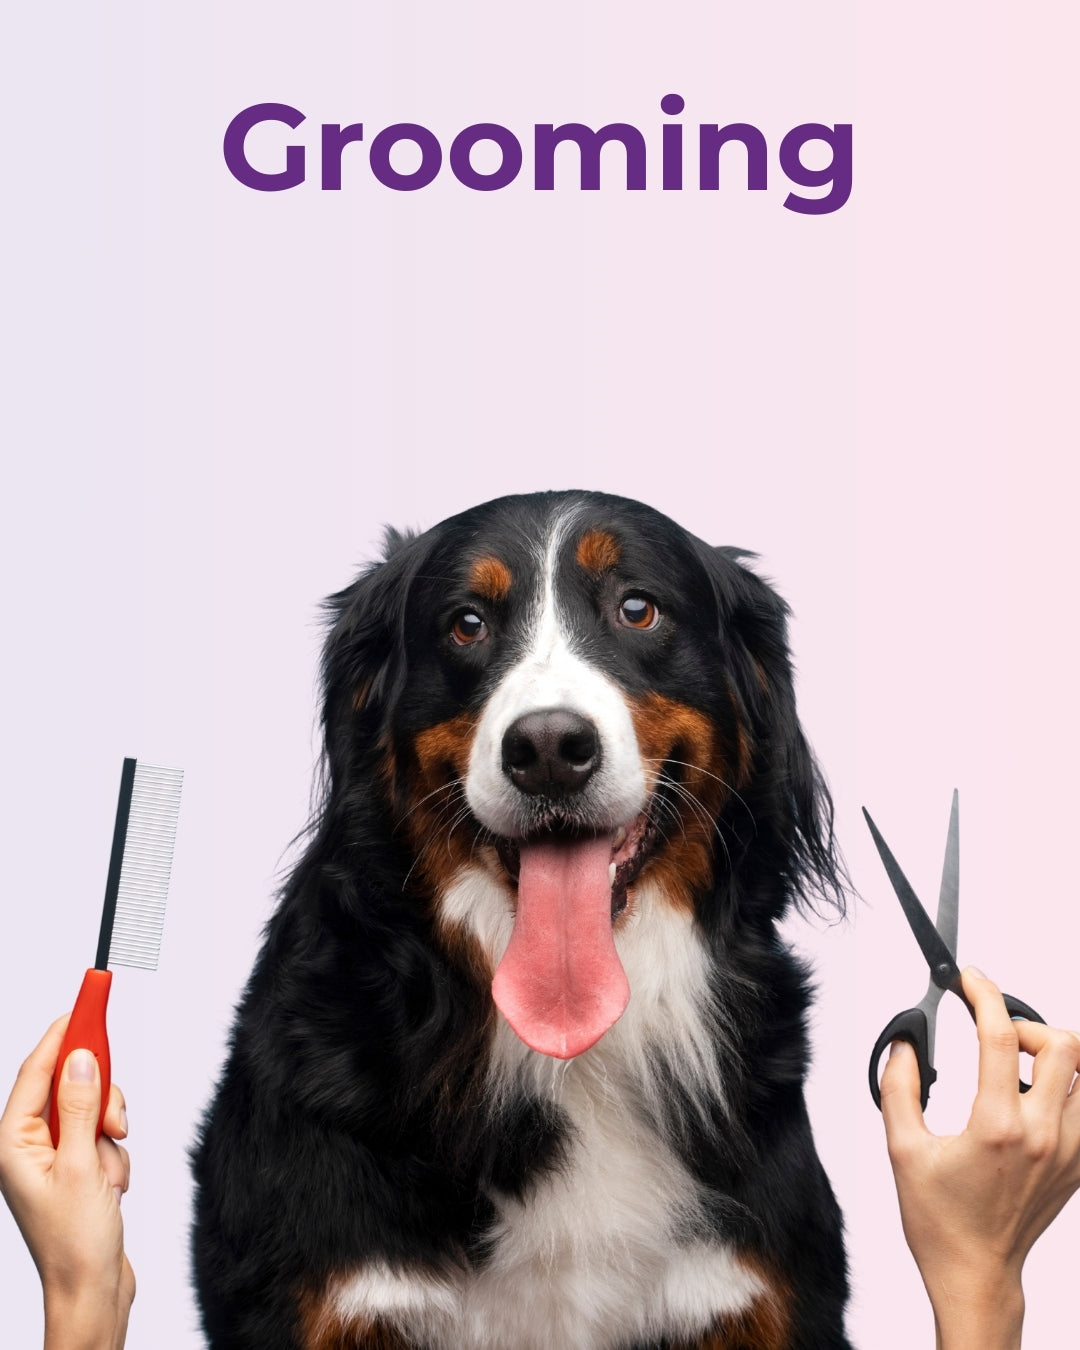  A fluffy Bernese Mountain Dog with its tongue out sits happily between a pair of hands holding grooming tools - a comb on the left and scissors on the right. The background is a gradient of light purple and pink with the word "Grooming" in bold purple text at the top, highlighting pet grooming services.